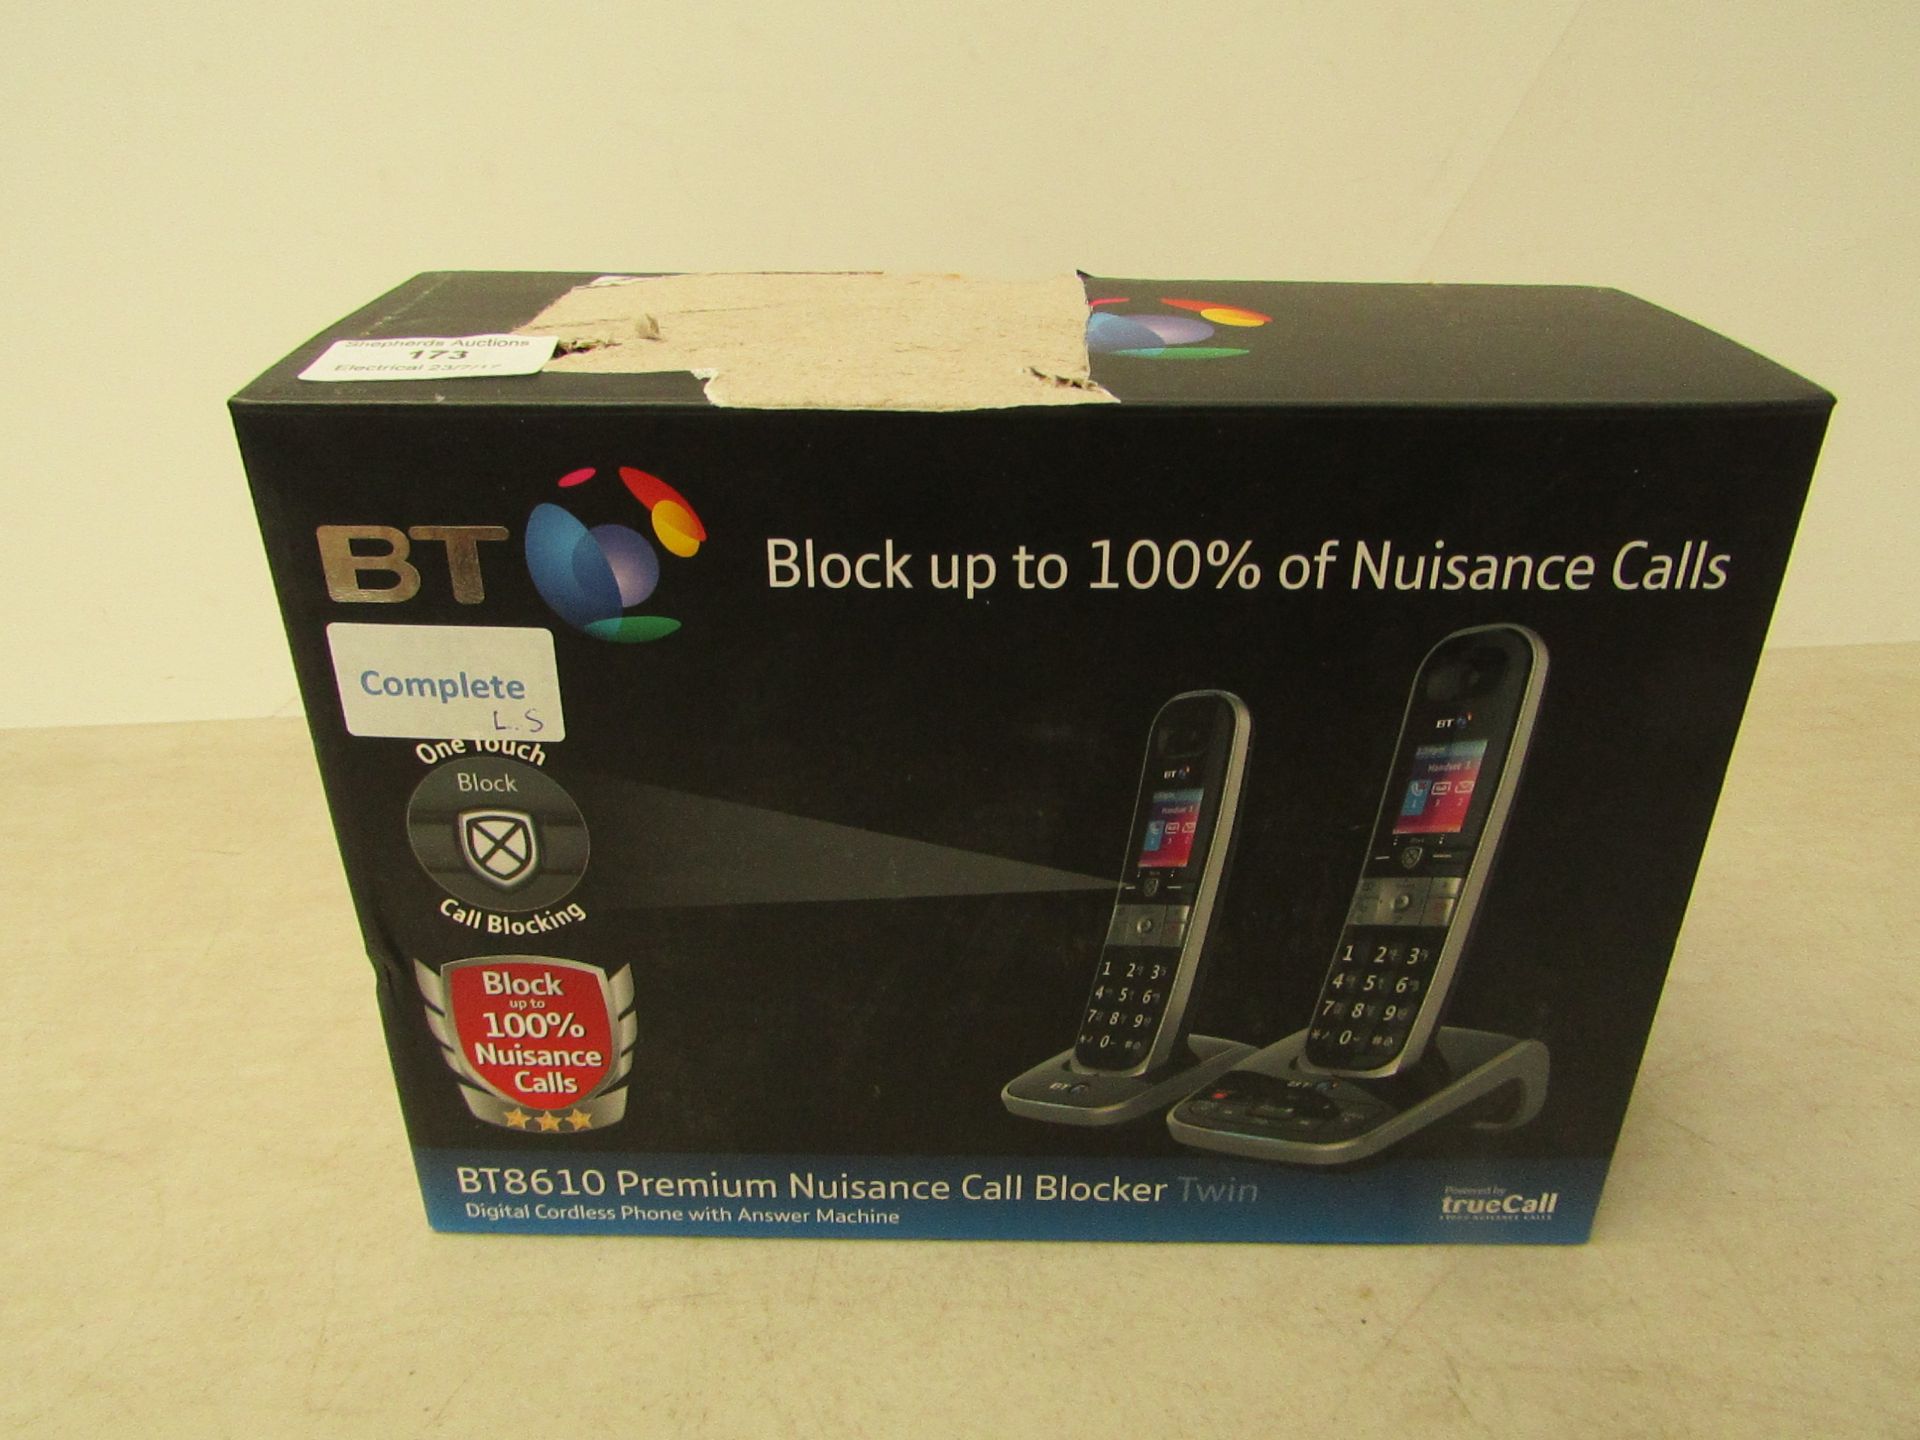 BT Premium Nuisance Call Blocker Twin (BT8610). Complete, untested & boxed.